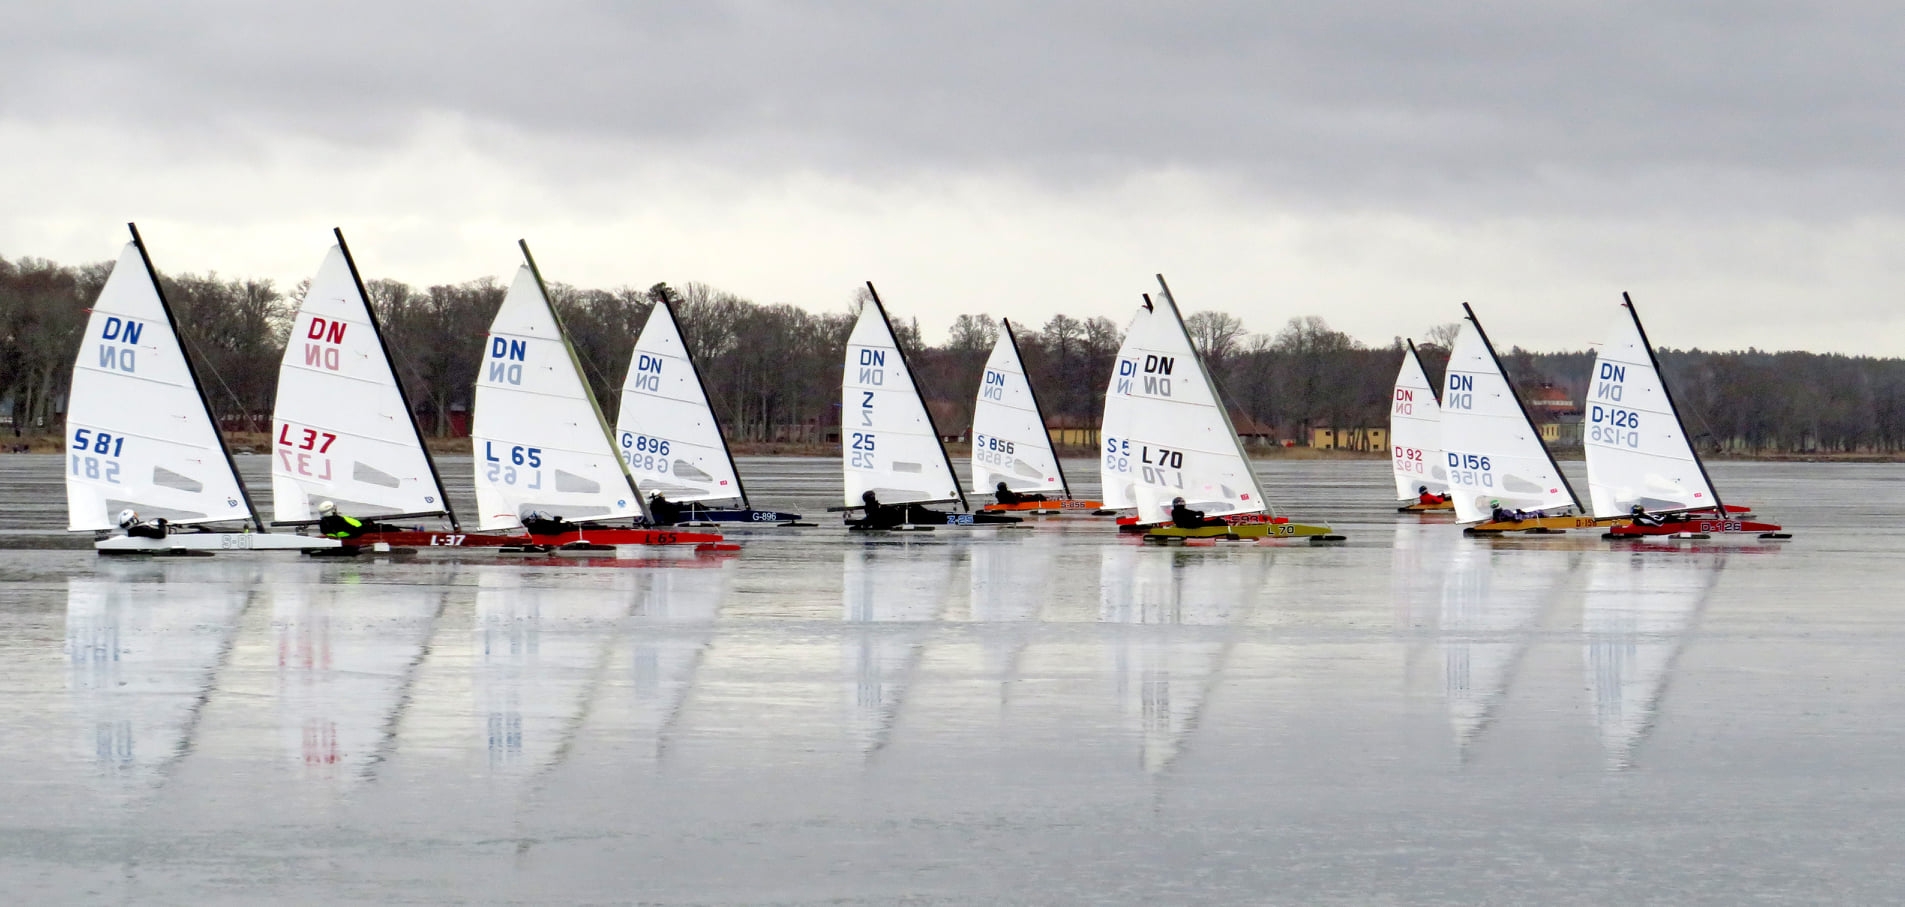  IceSailing  DN Grand Masters Cup Lake Oljaren SWE  Final results